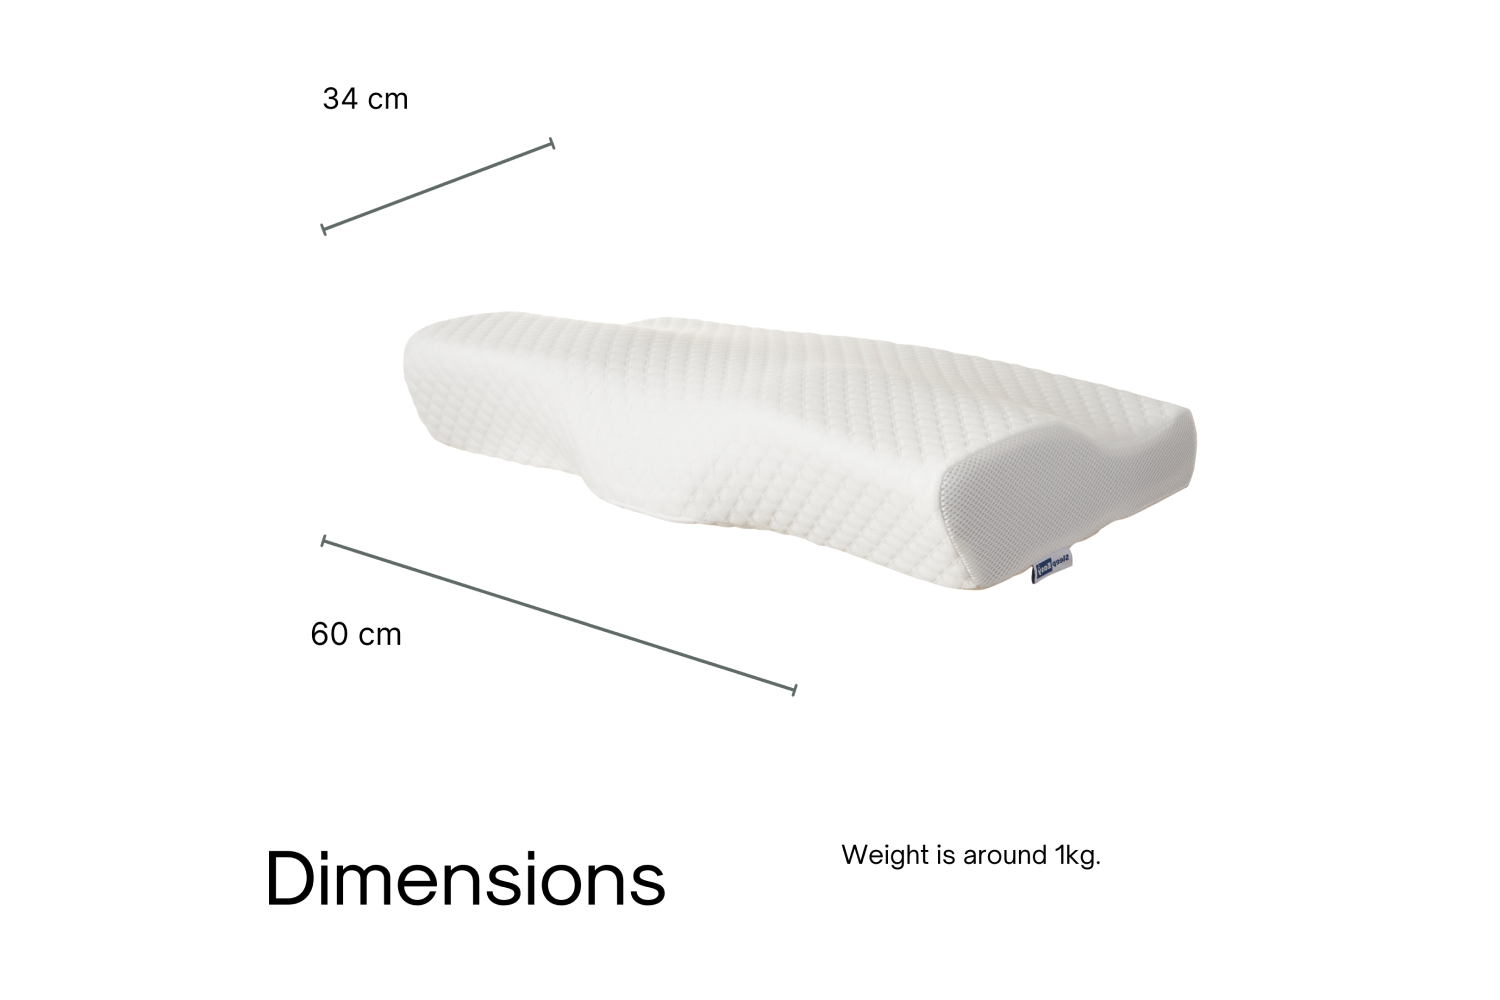 groove pillow with dimensions (34x50cm) and weight displayed (1kg)